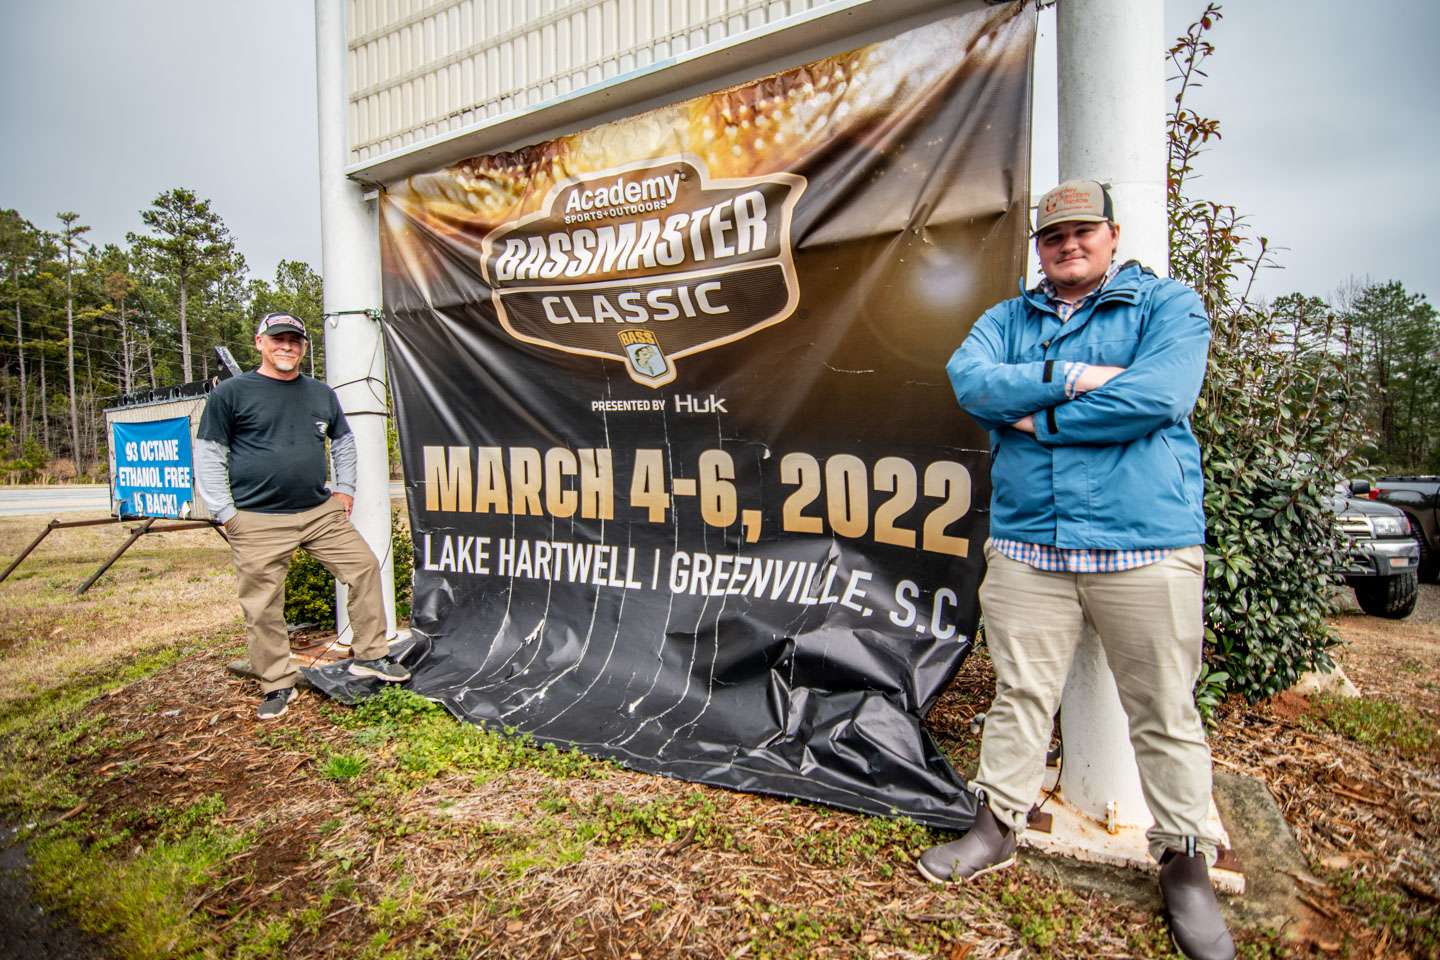 Hartwell tackle store has college fishing connections - Bassmaster